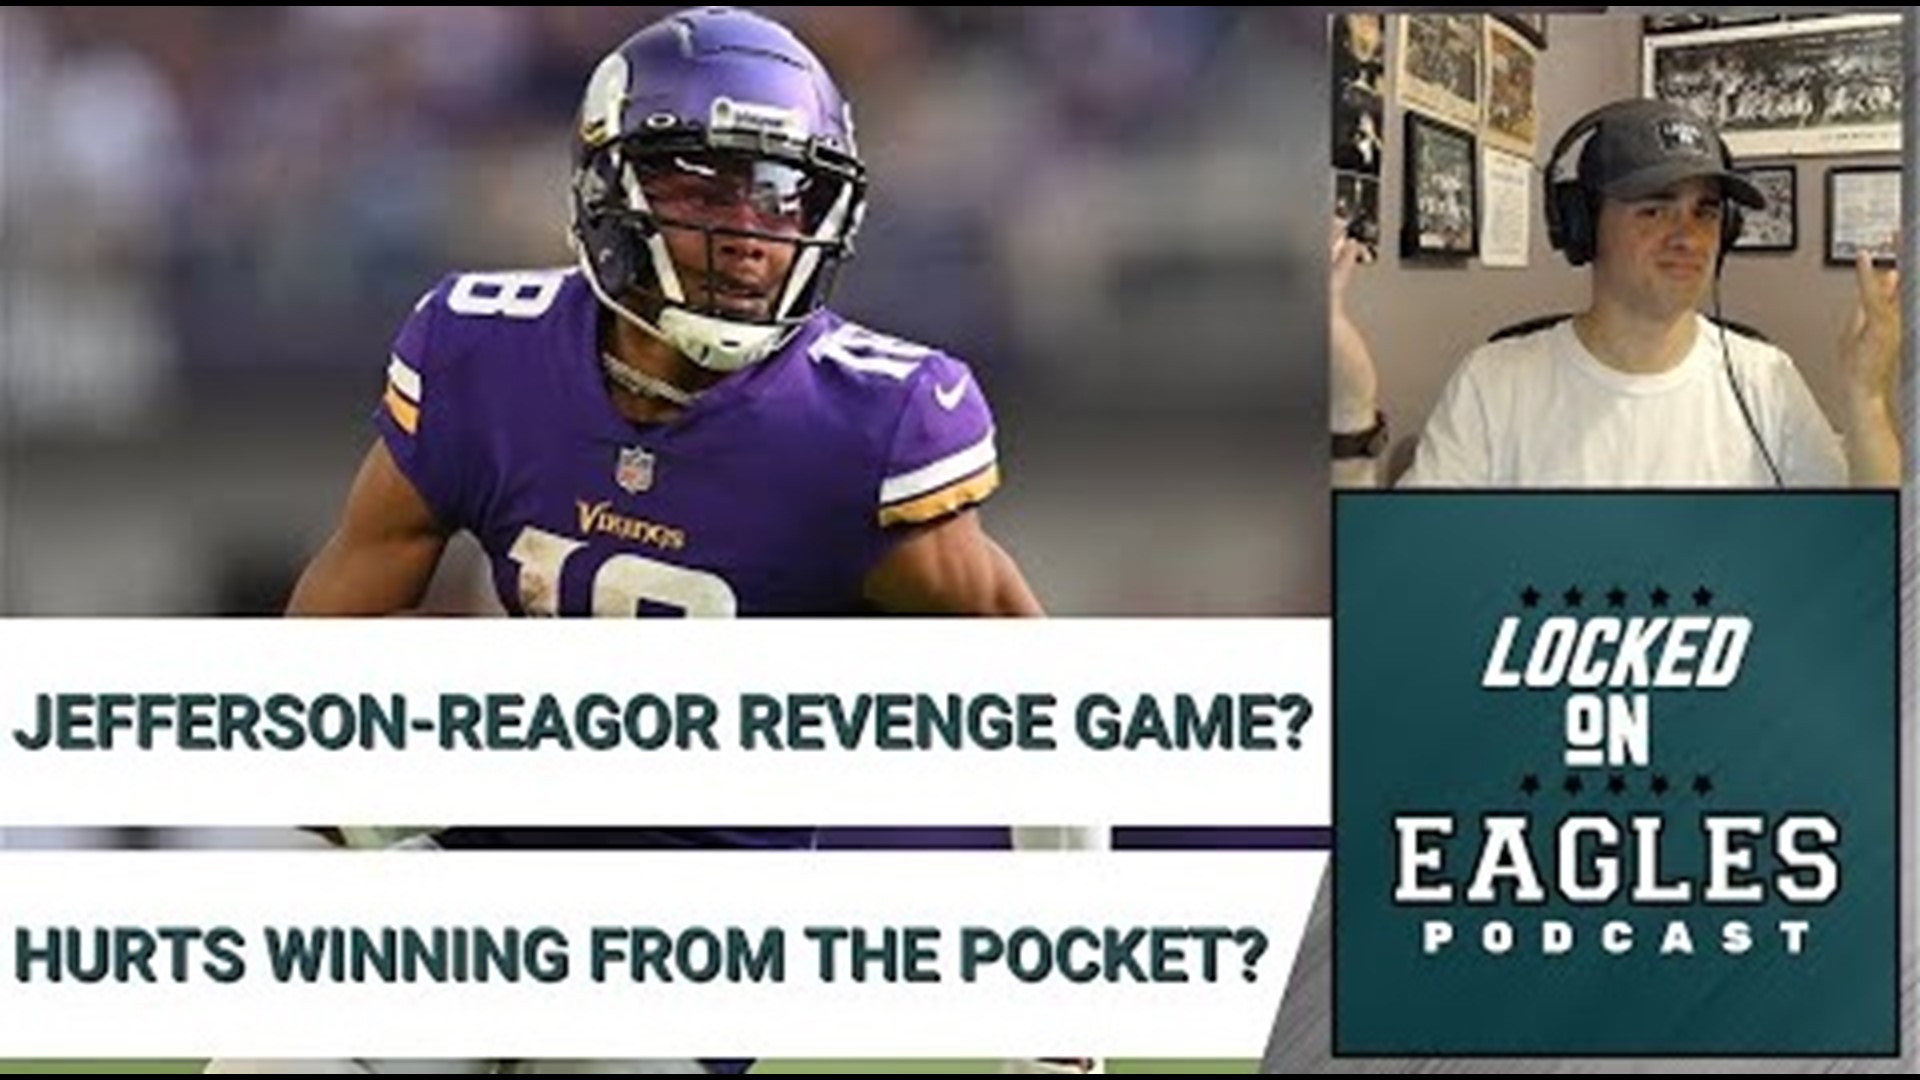 When the Philadelphia Eagles take on the Minnesota Vikings on Monday Night Football, will Justin Jefferson and Jalen Reagor be extra motivated to shine?